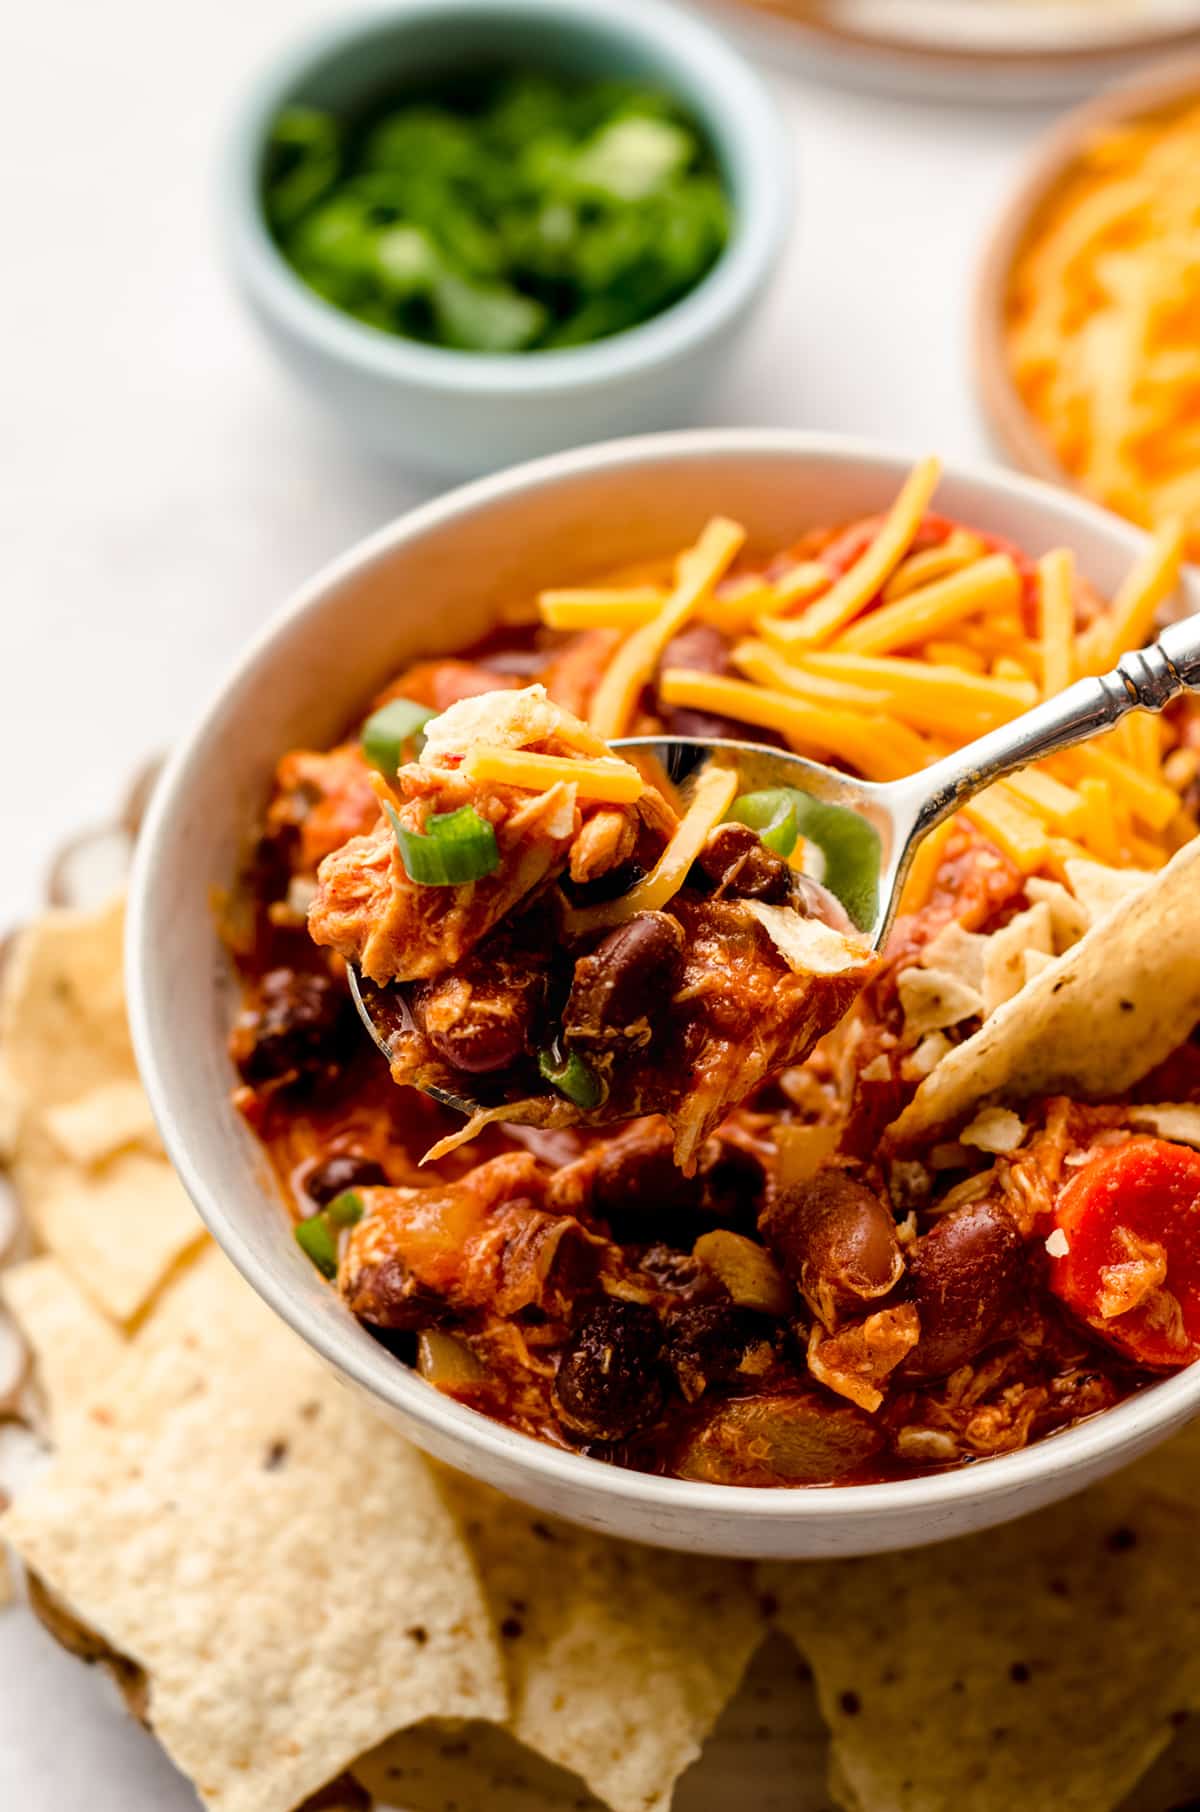 buffalo chicken chili in a bowl on a plate with tortilla chips and a bite on a spoon